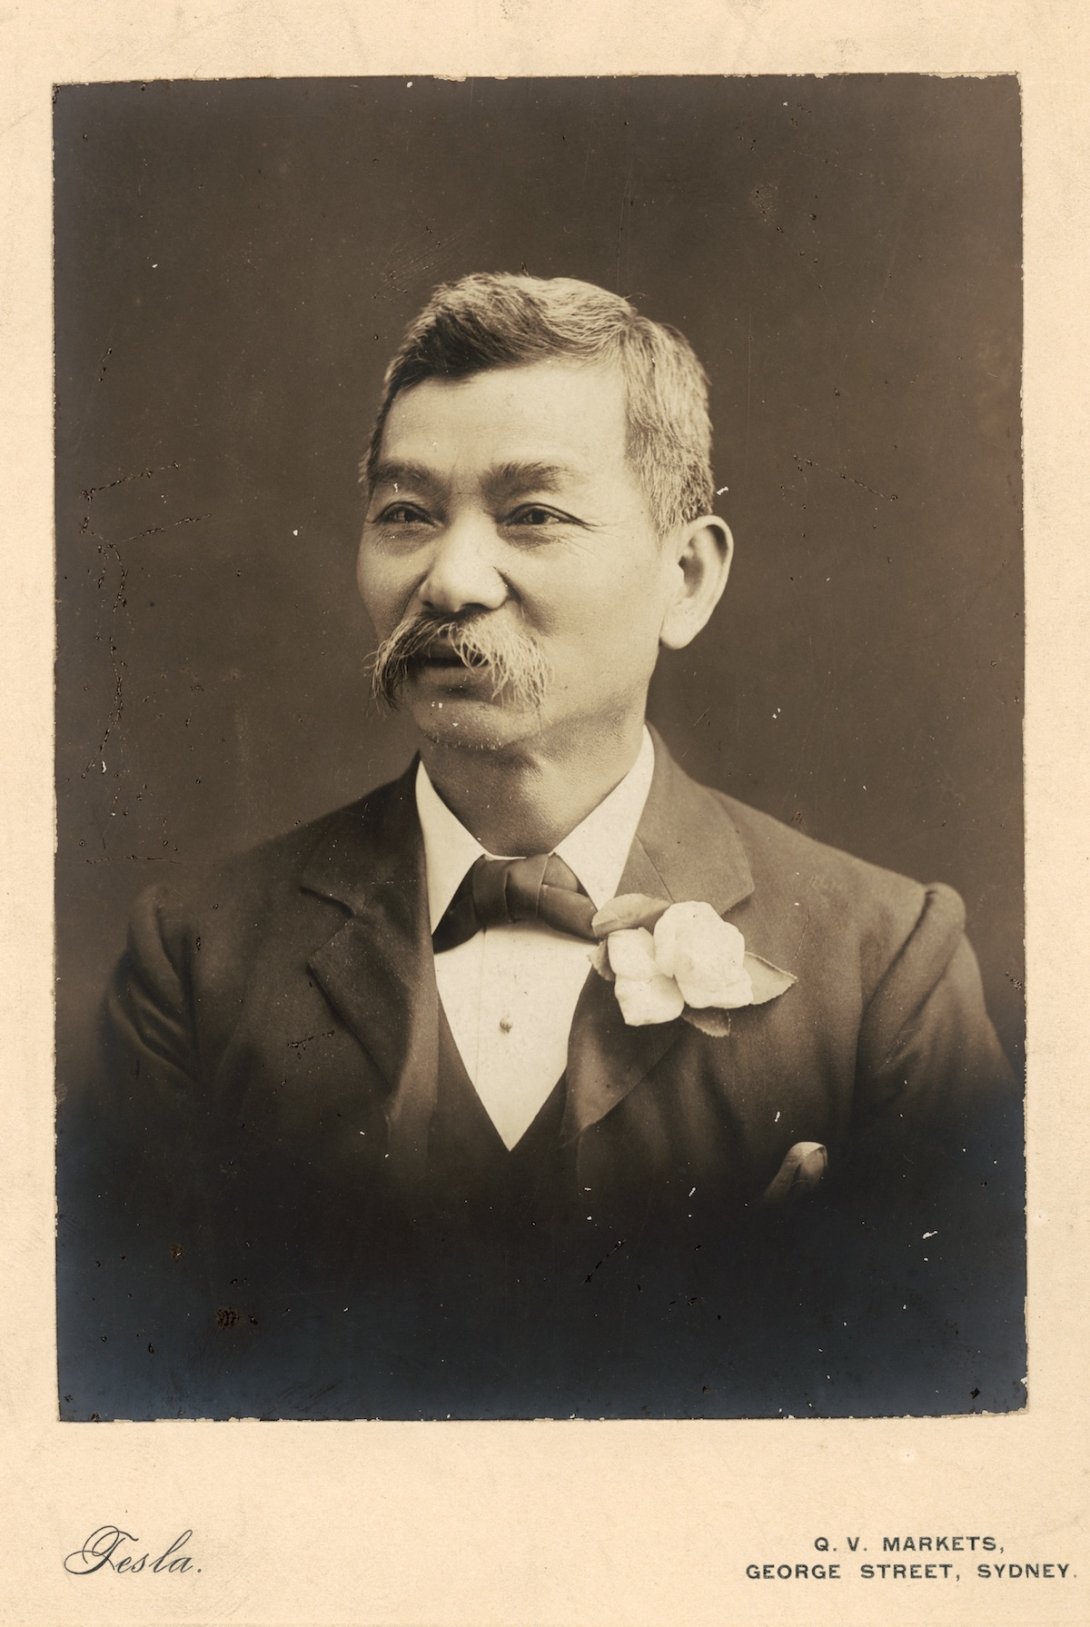 Portrait of a Chinese-Australian man with a moustache and wearing a nice suit